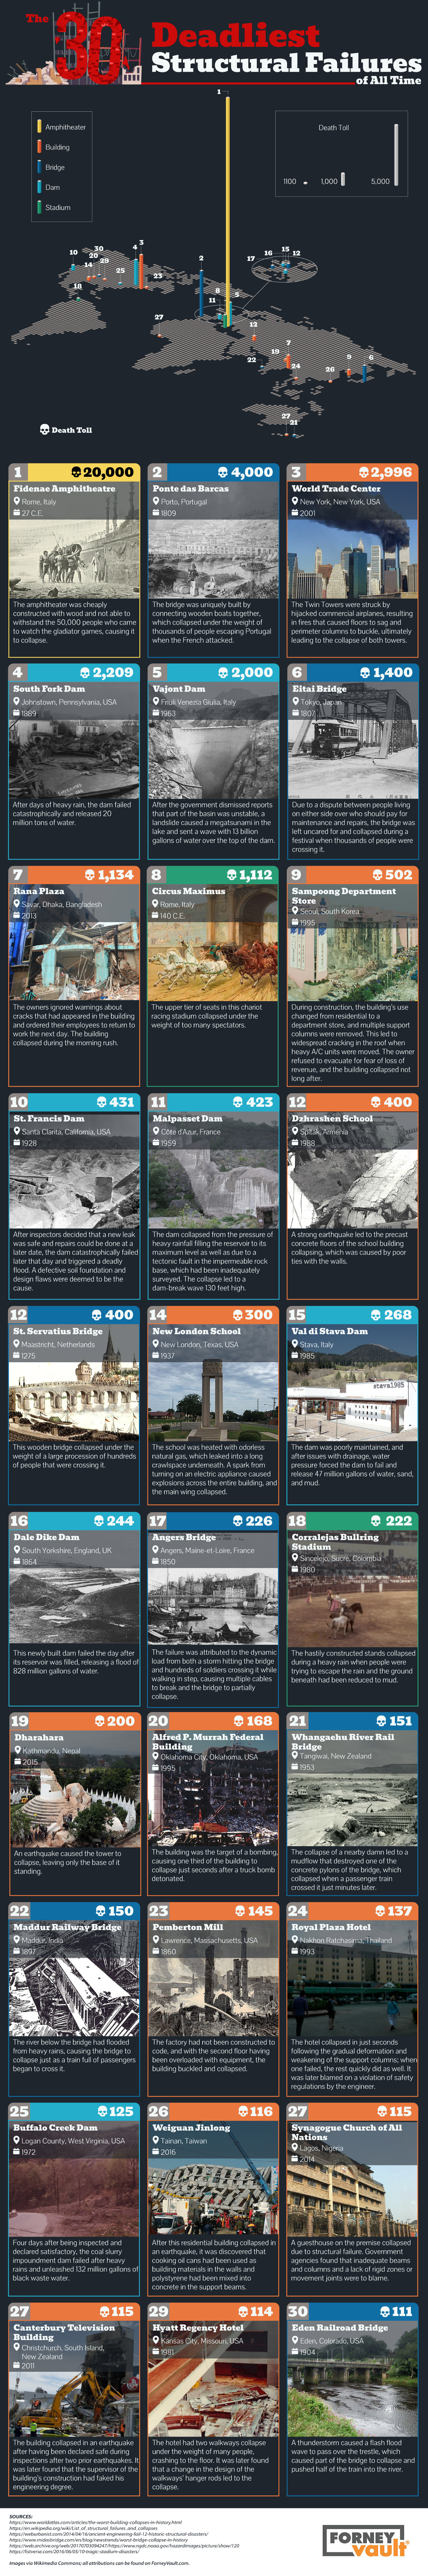 The Deadliest Structural Failures of All Time #Infographic